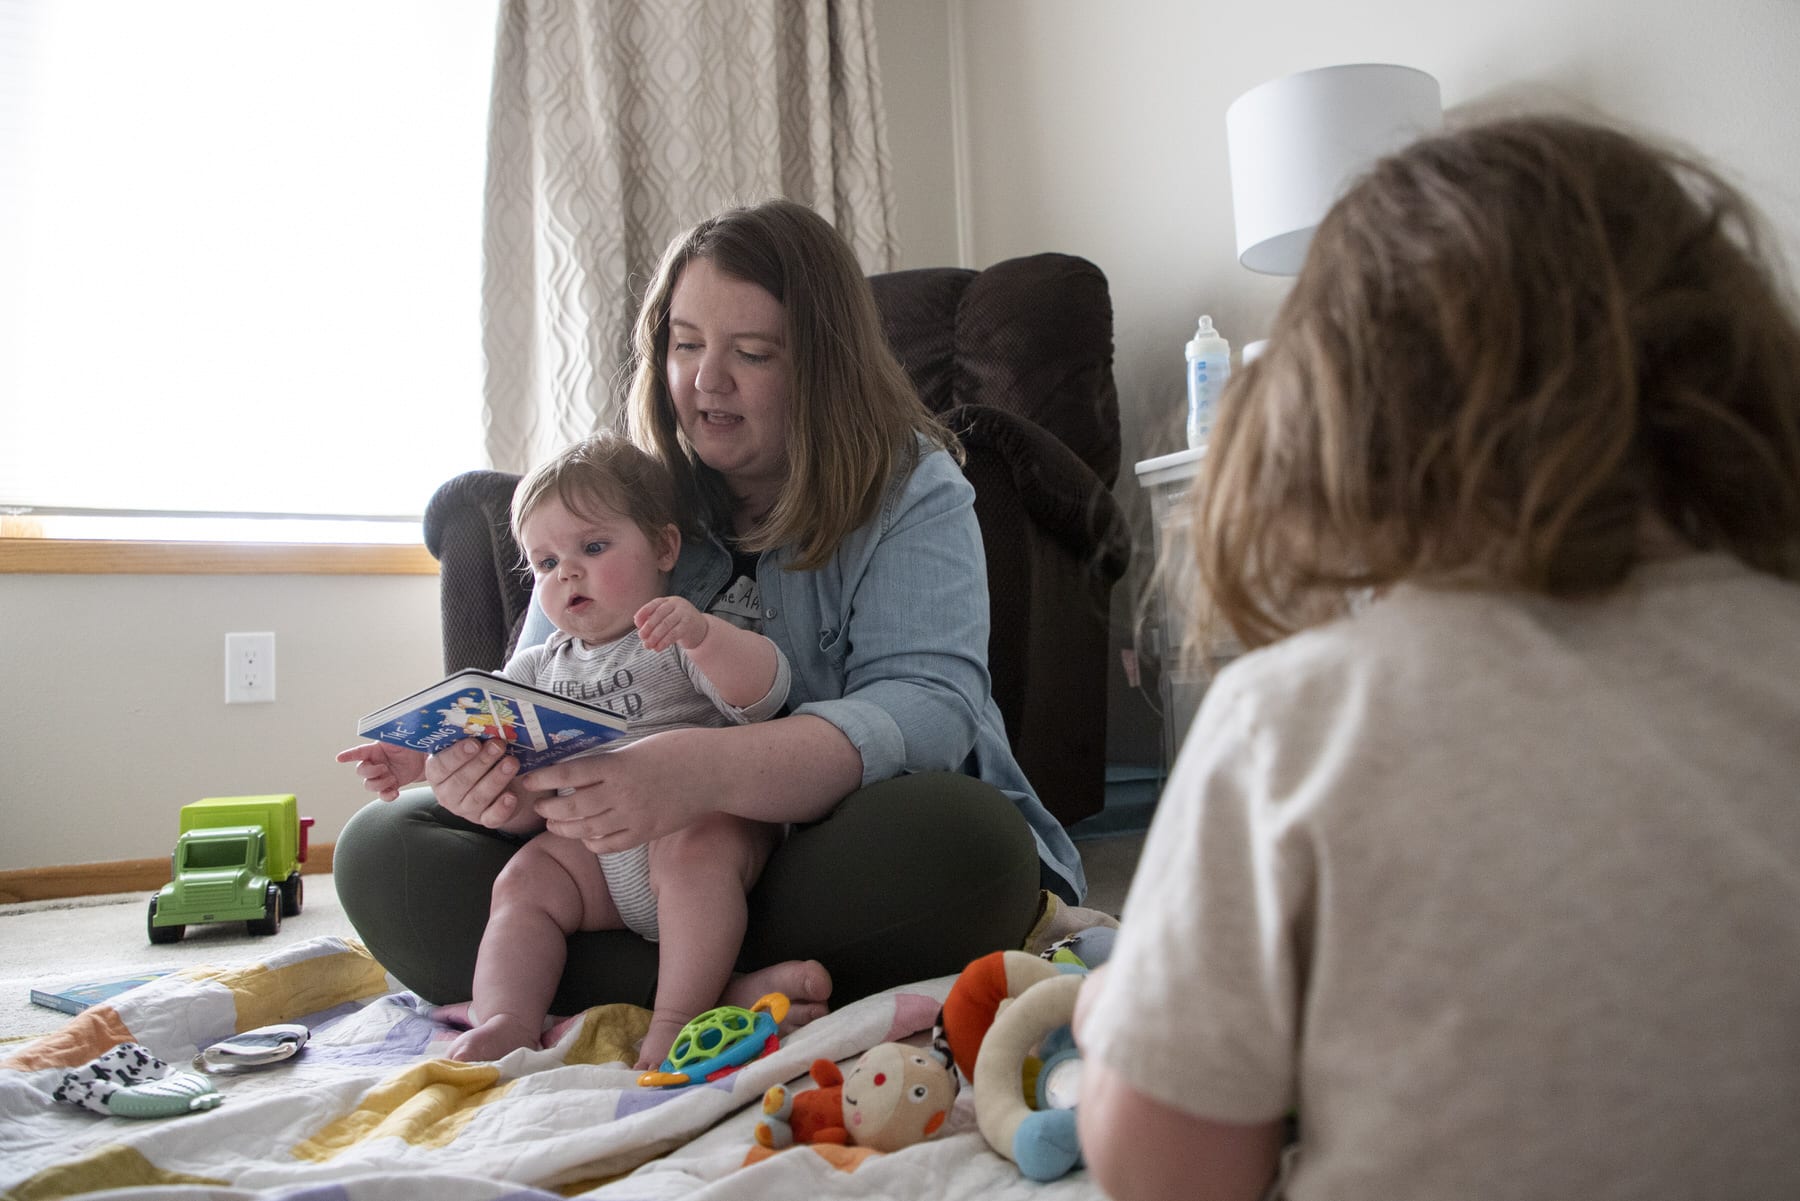 A mother reads to her children in a room.